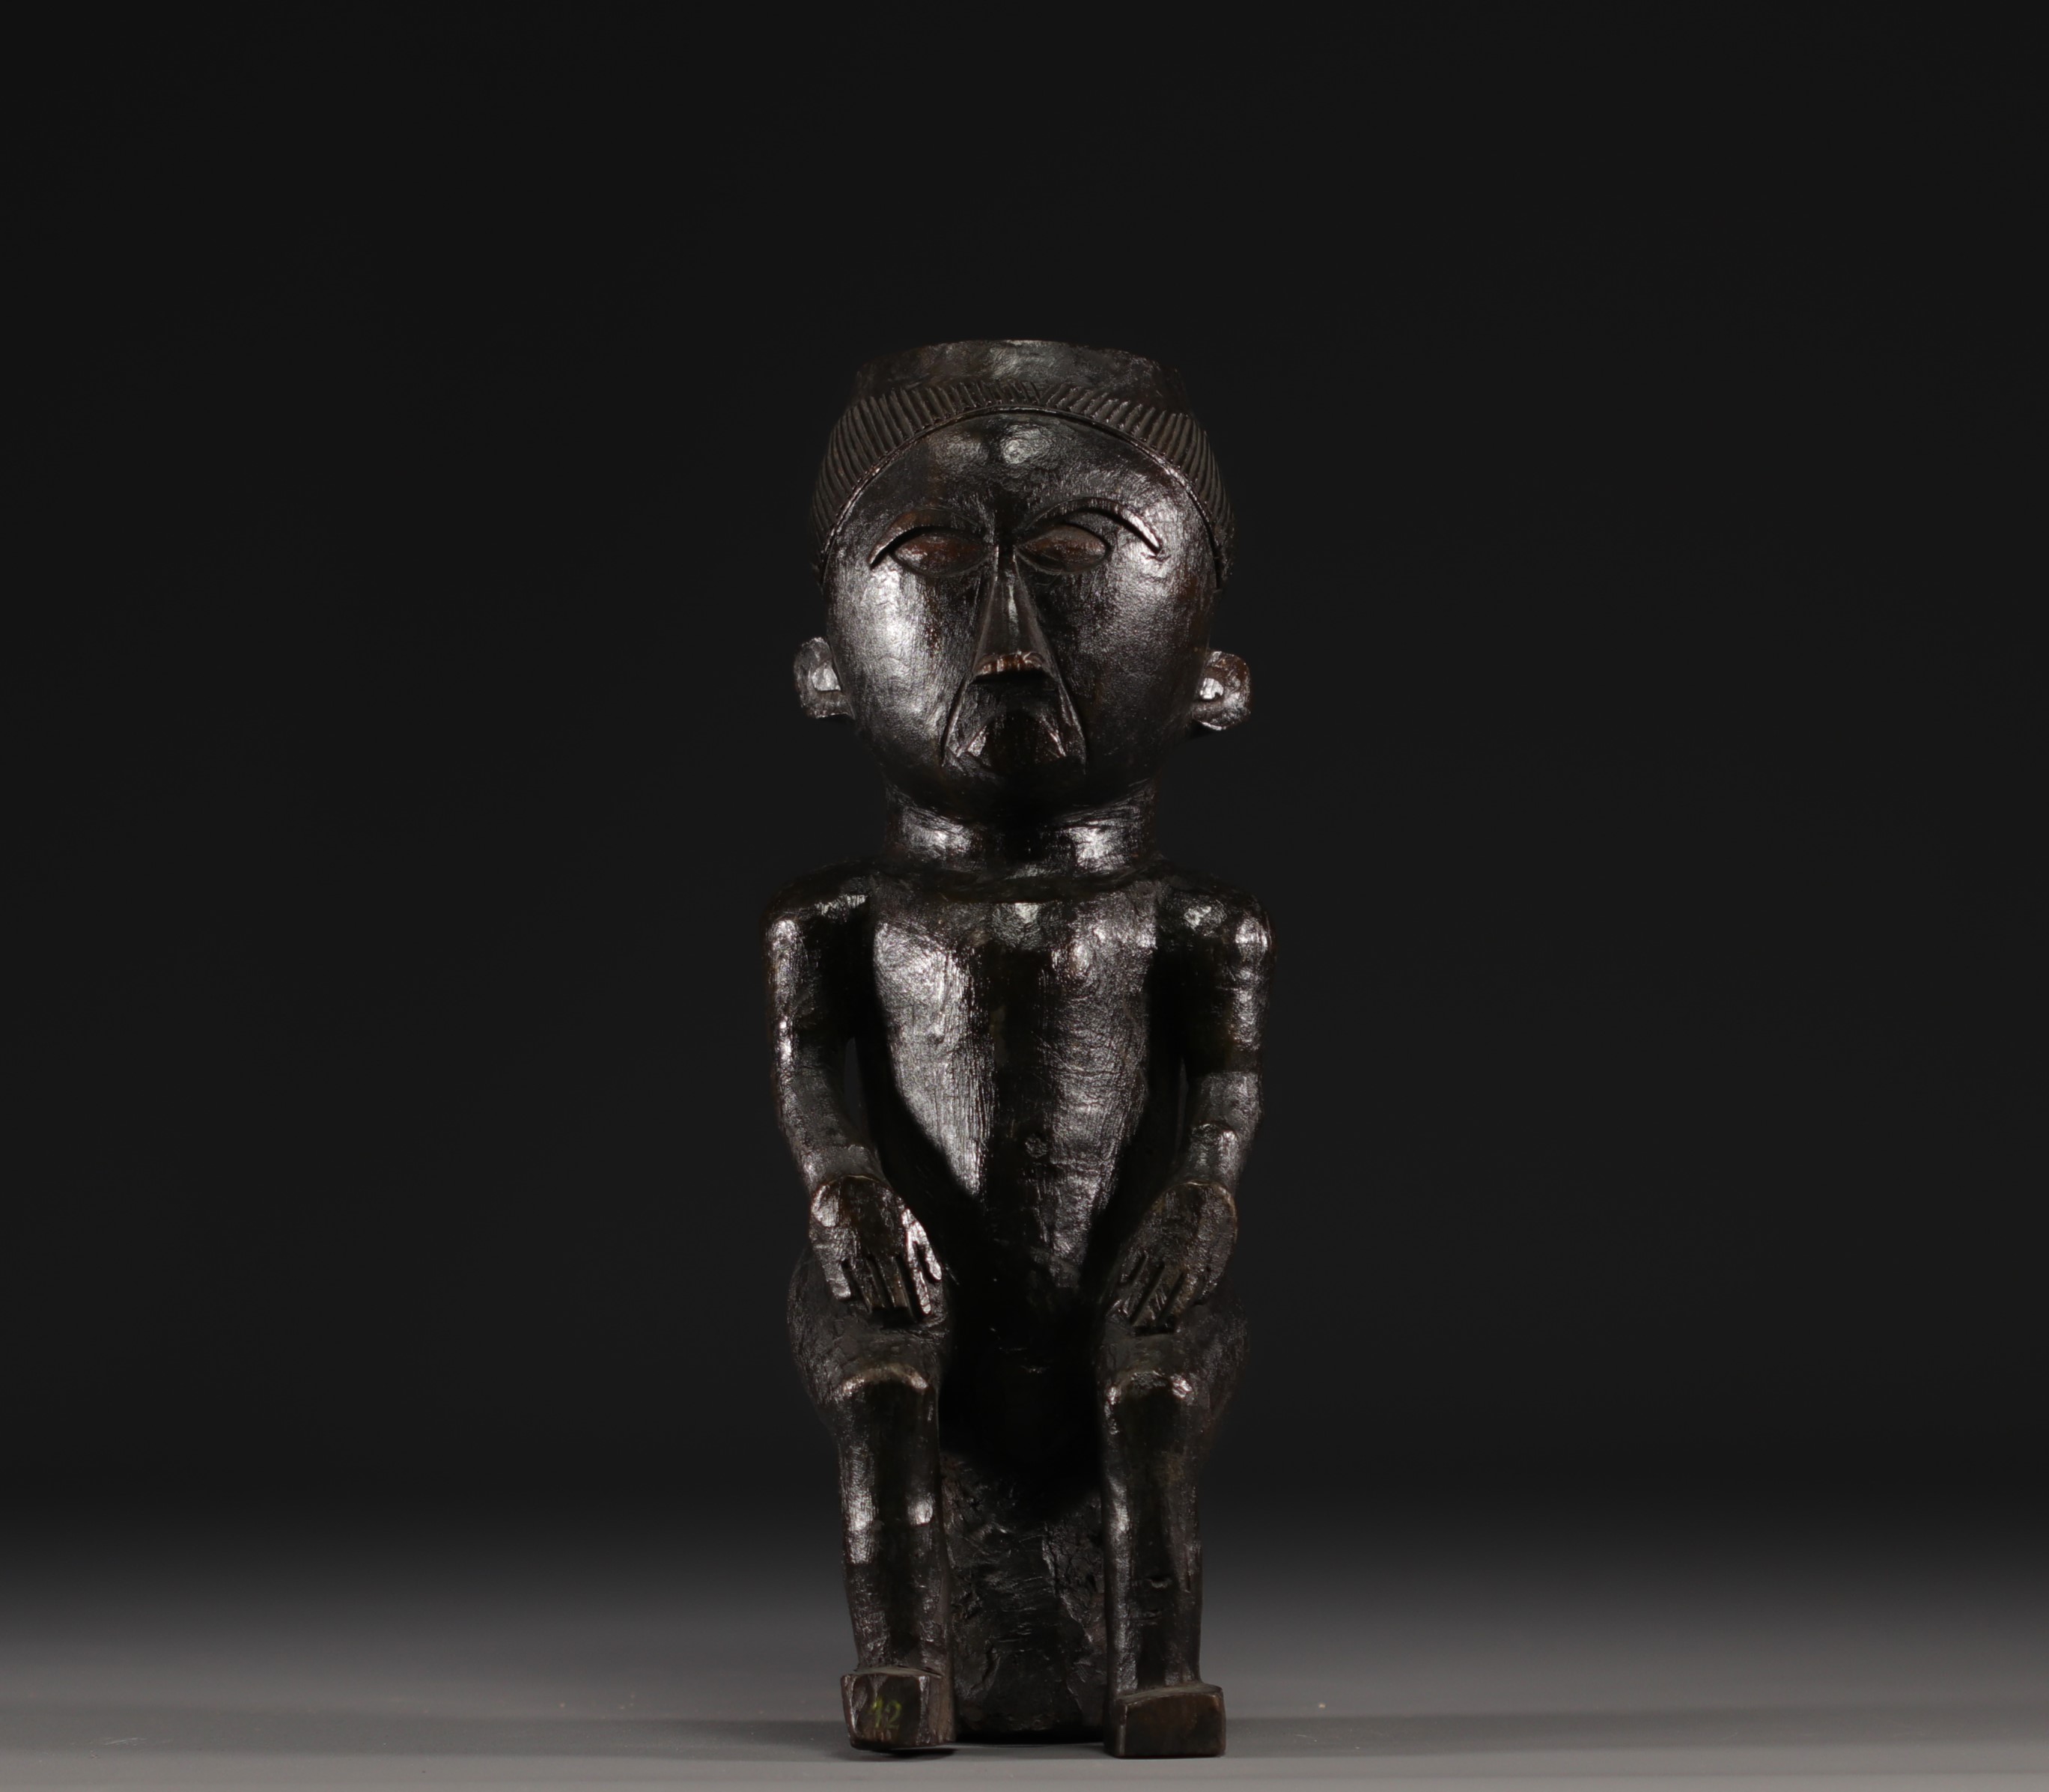 Large Kuba cup depicting a seated figure - Rep.Dem.Congo - Image 3 of 4